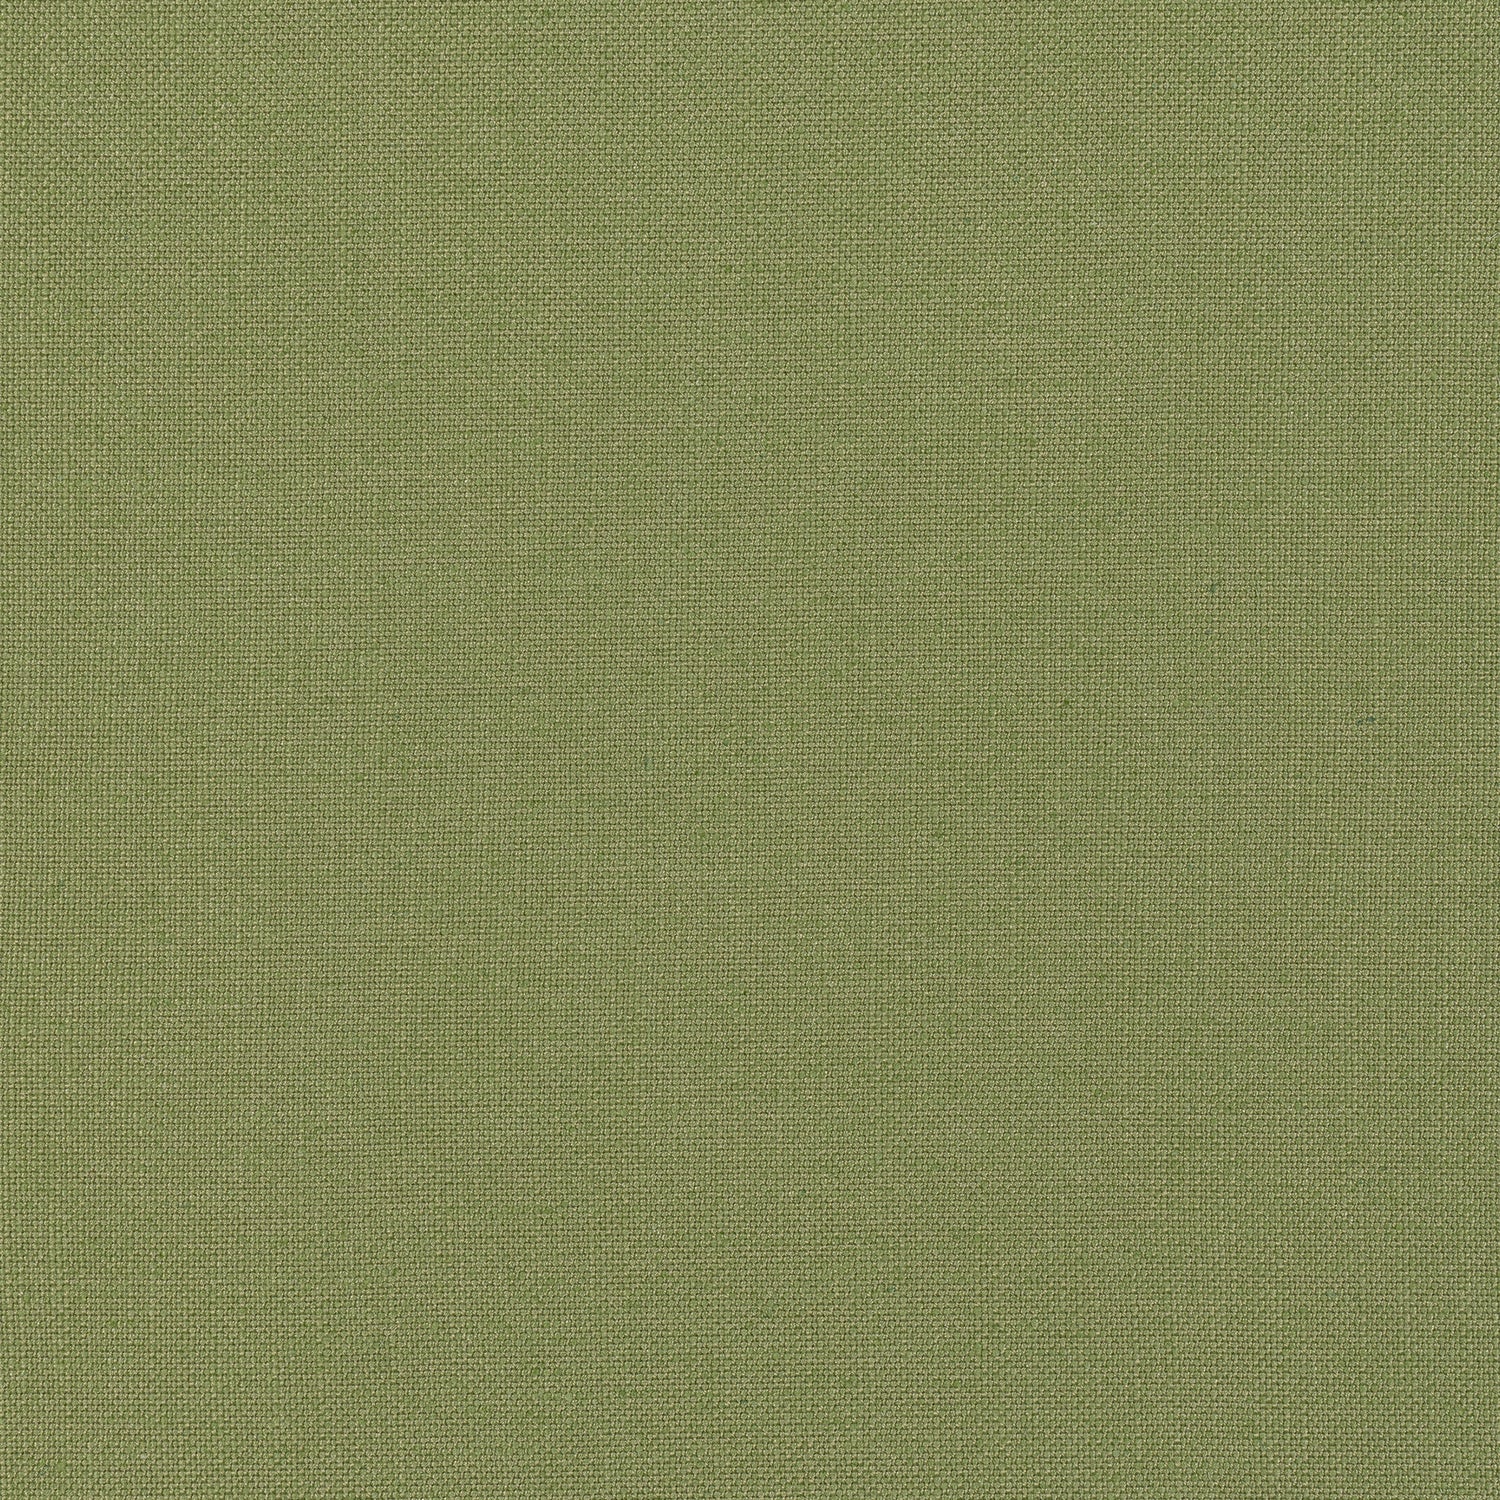 Palisade Linen fabric in olive color - pattern number FWW7657 - by Thibaut in the Palisades collection